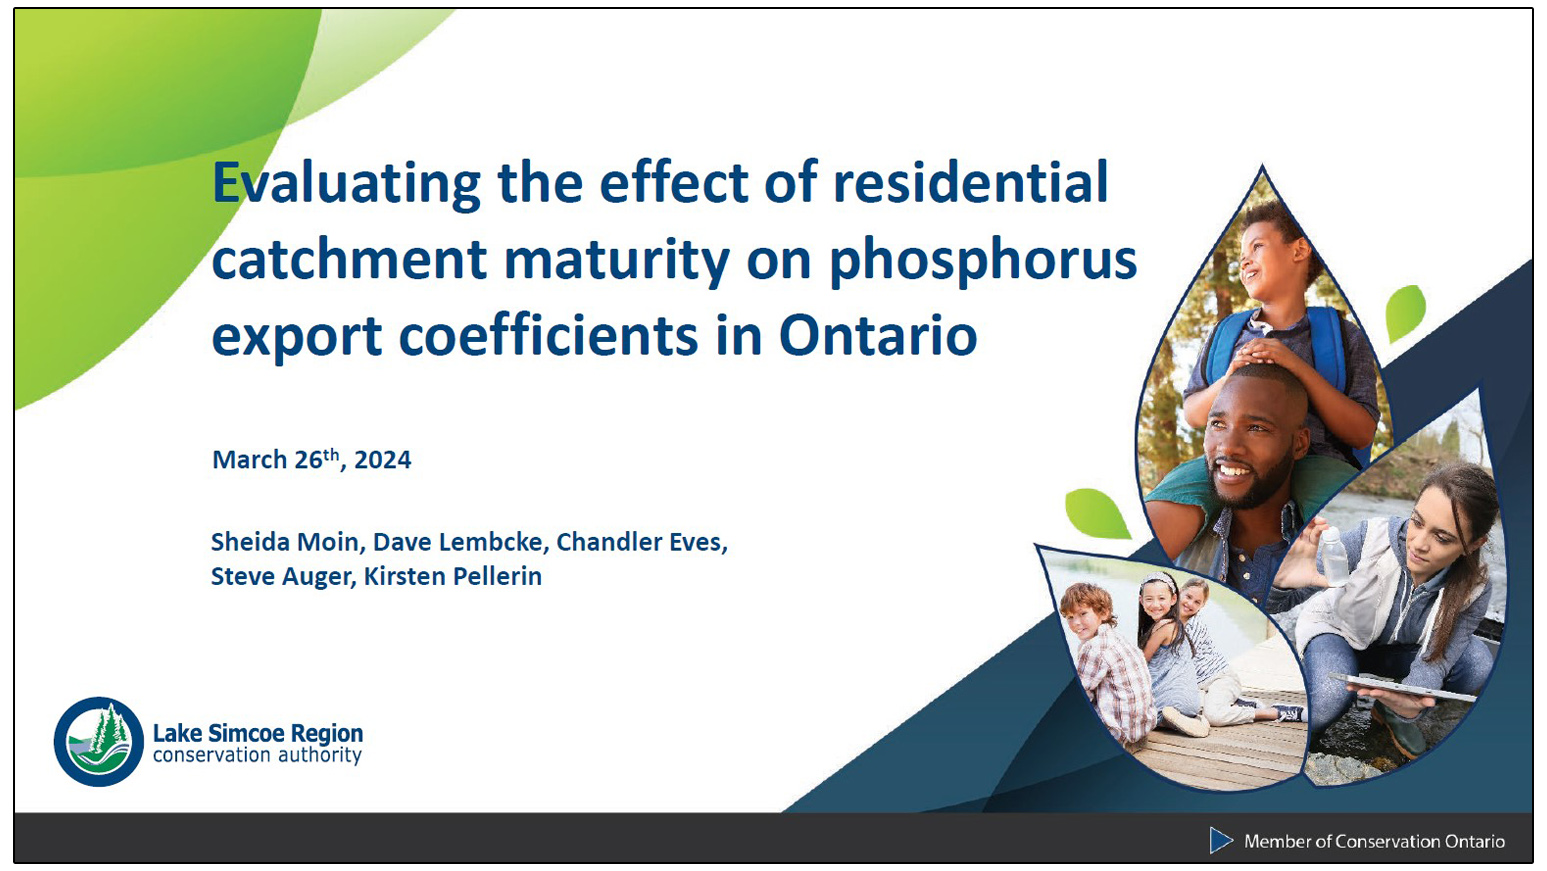 Evaluating the Effect of Residential Catchment Maturity on Phosphorus Export Coefficients in Ontario - presentation by Sheida Moin